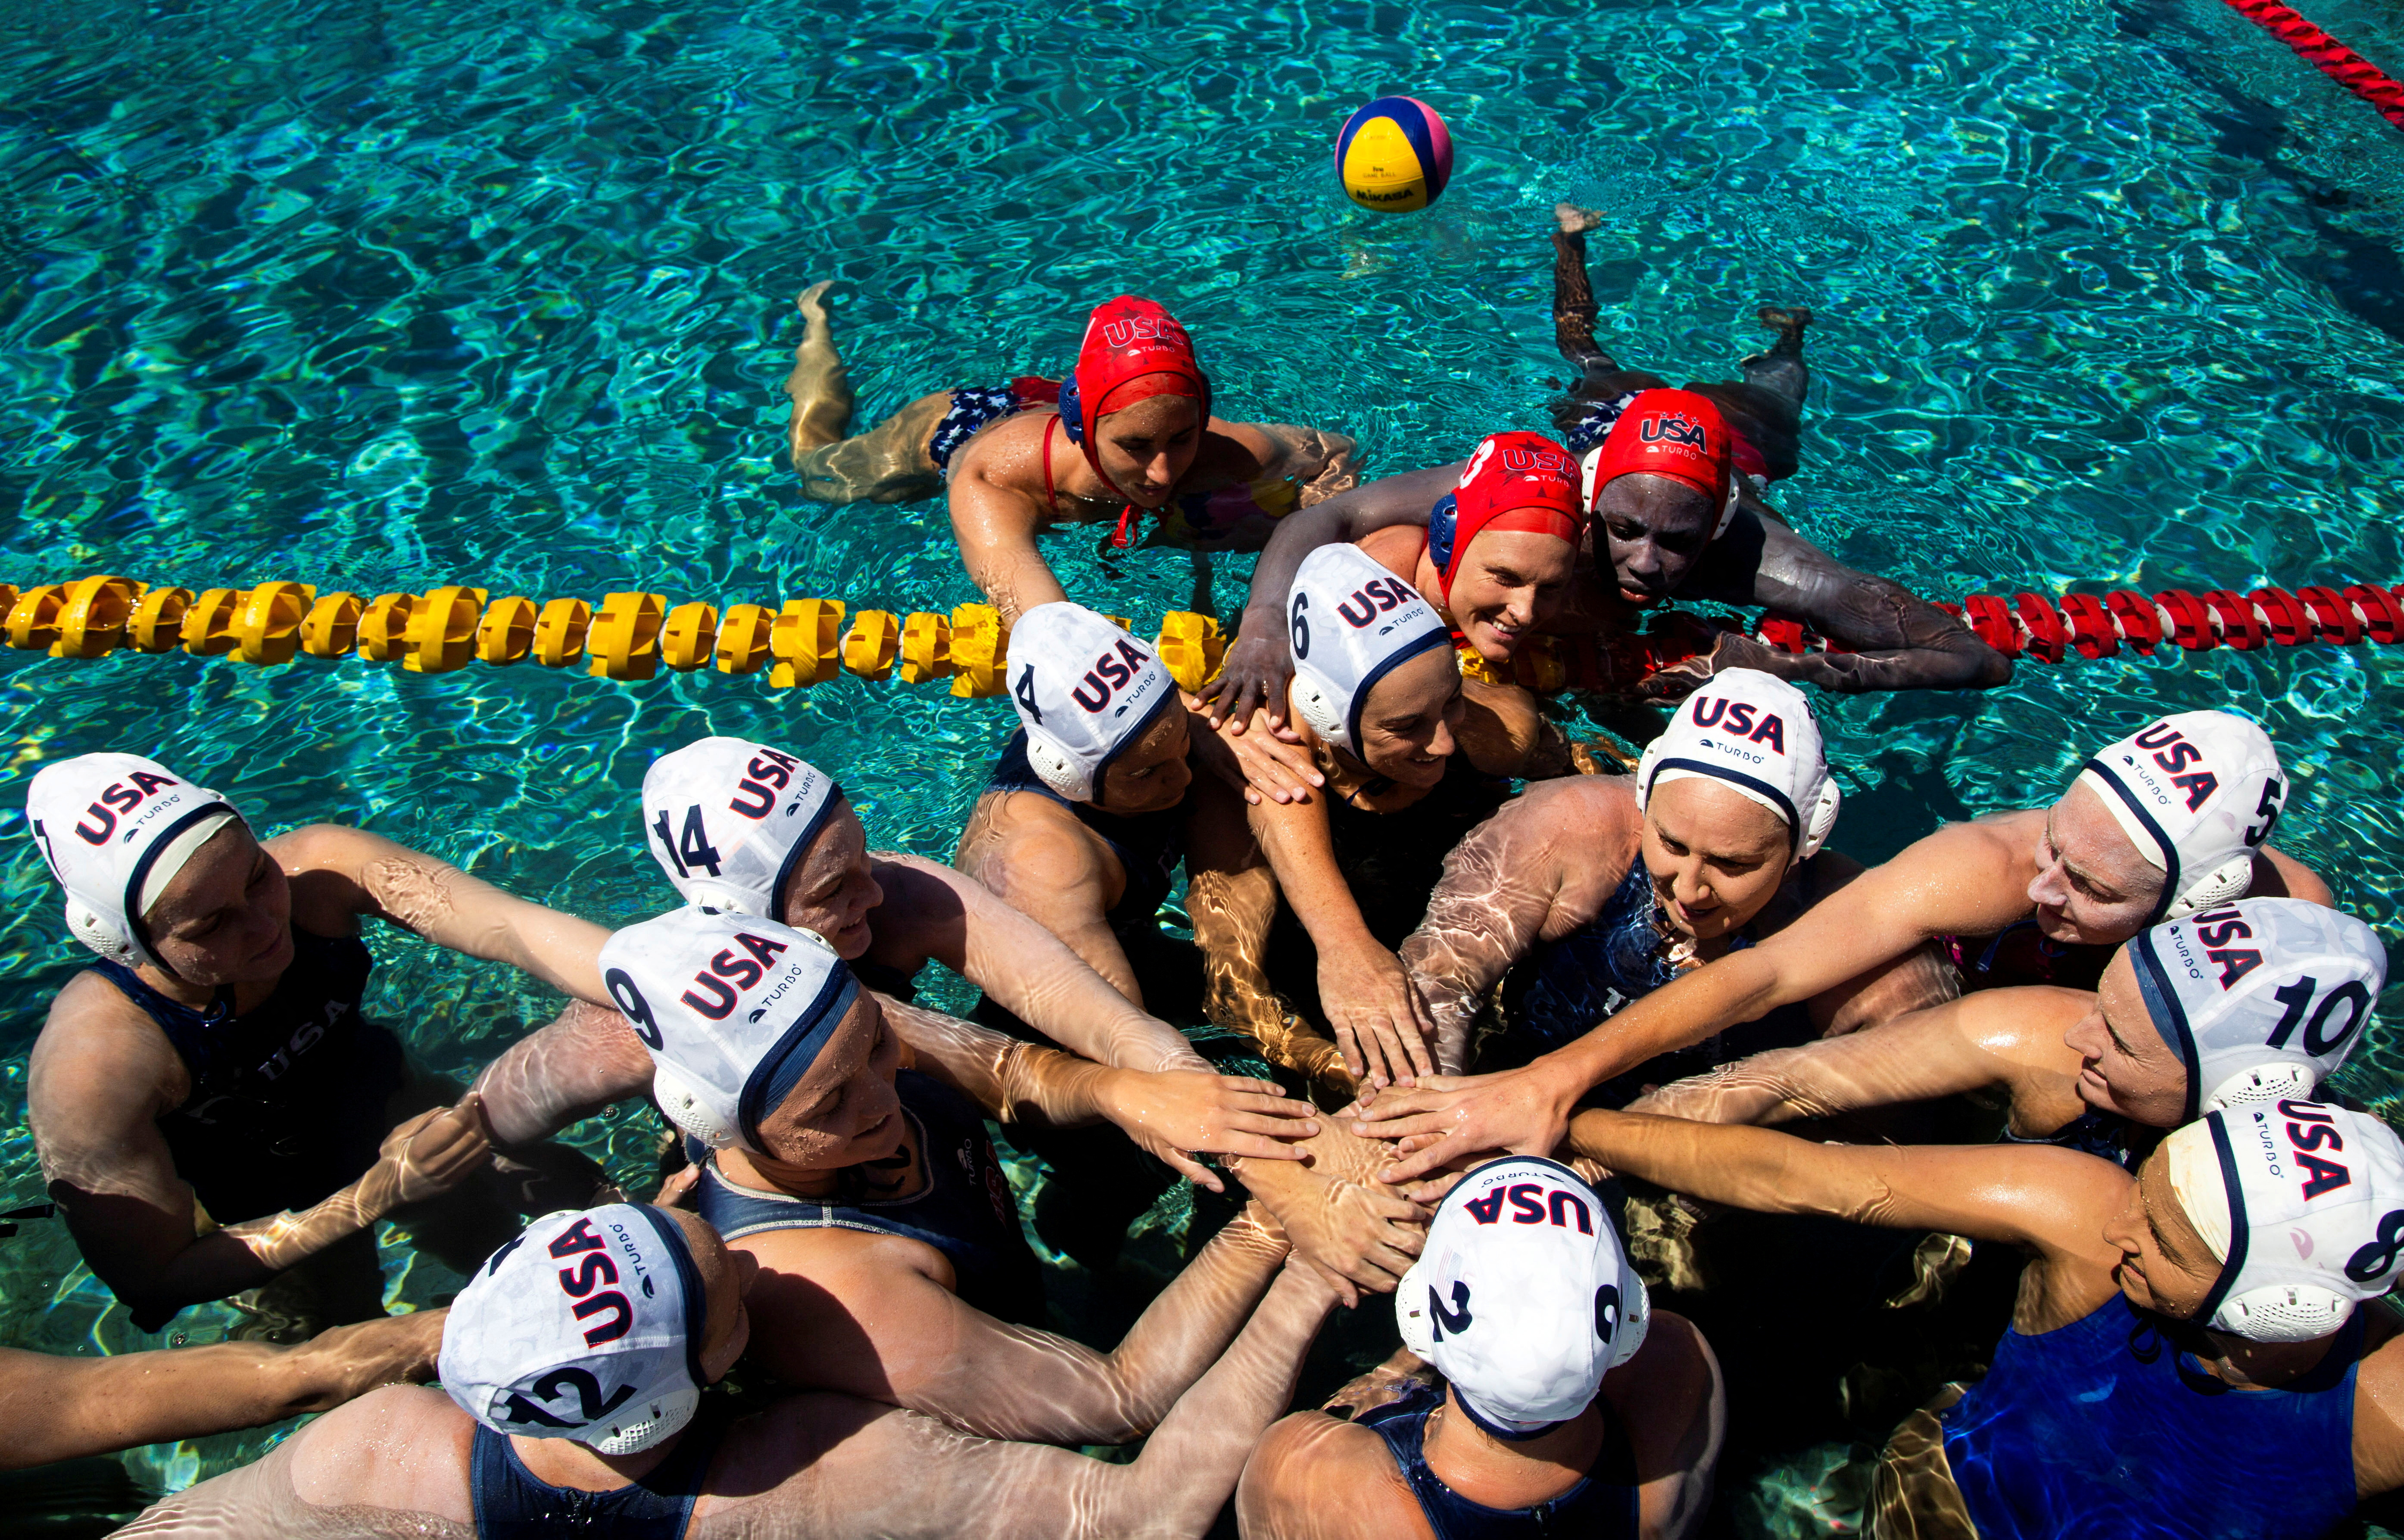 U.S. Women's Water Polo National team trains for the Olympics